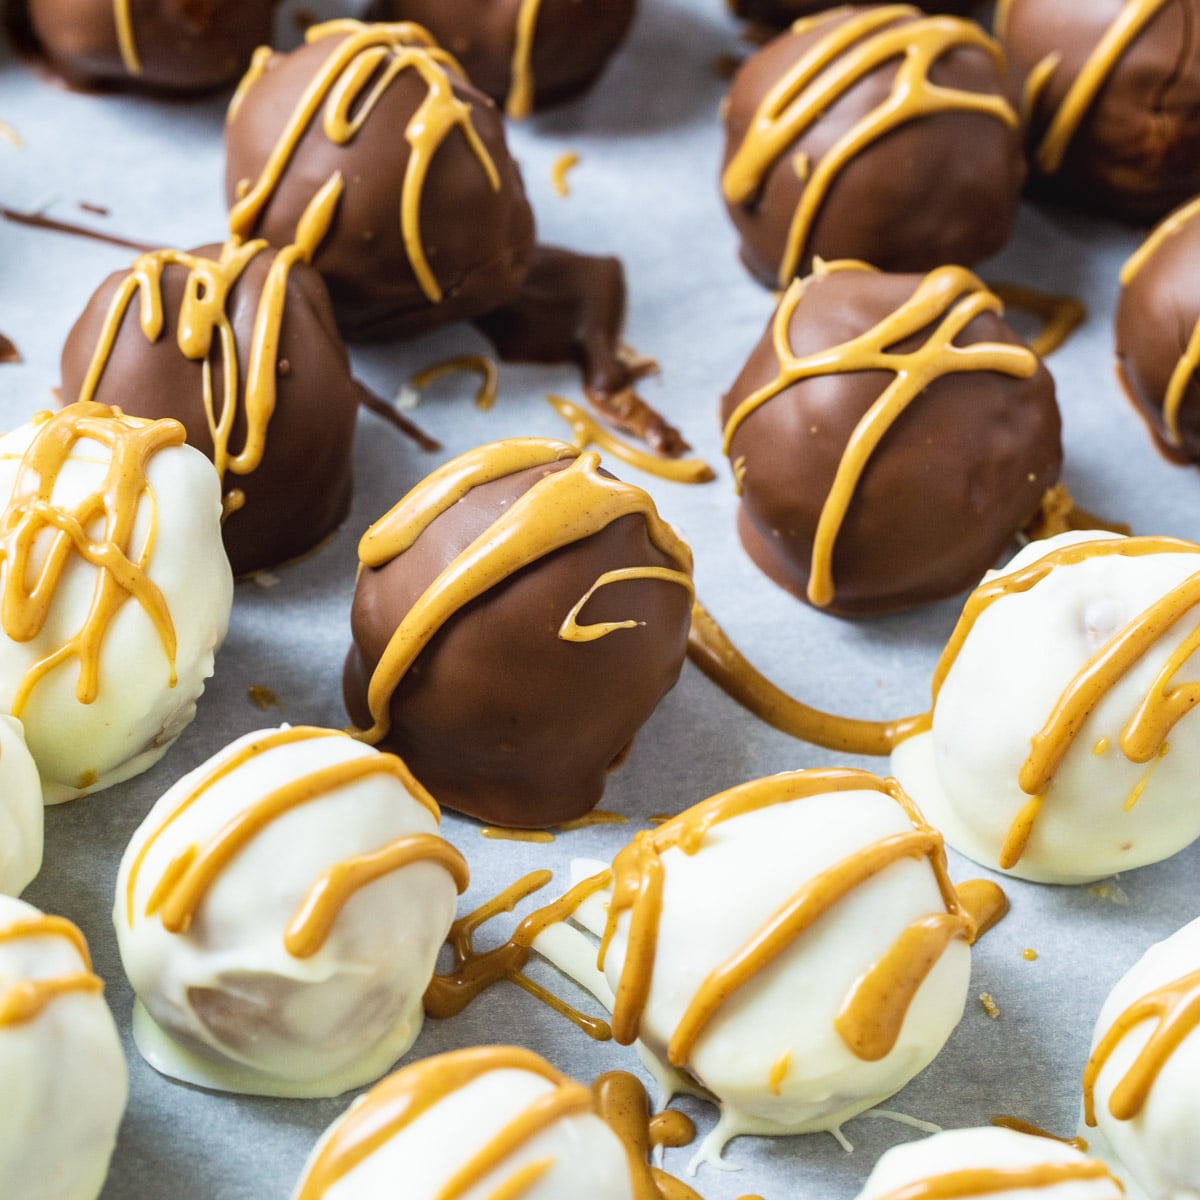 White chocolate and Milk Chocolate covered truffles drizzled with peanut butter.